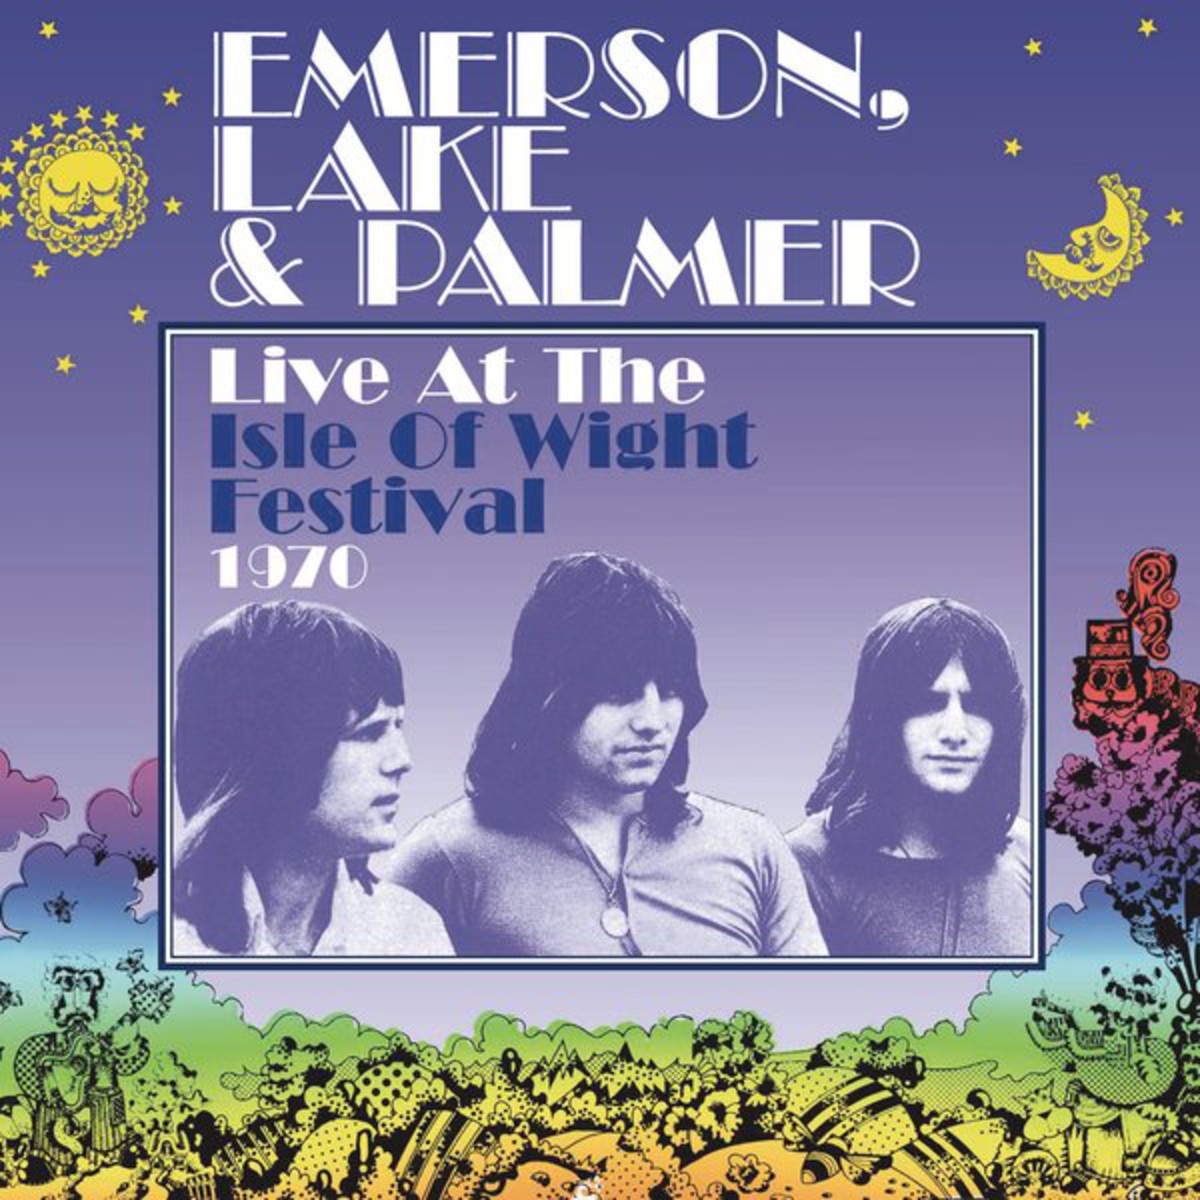 Emerson, Lake and Palmer Discuss the Isle of Wight Festival